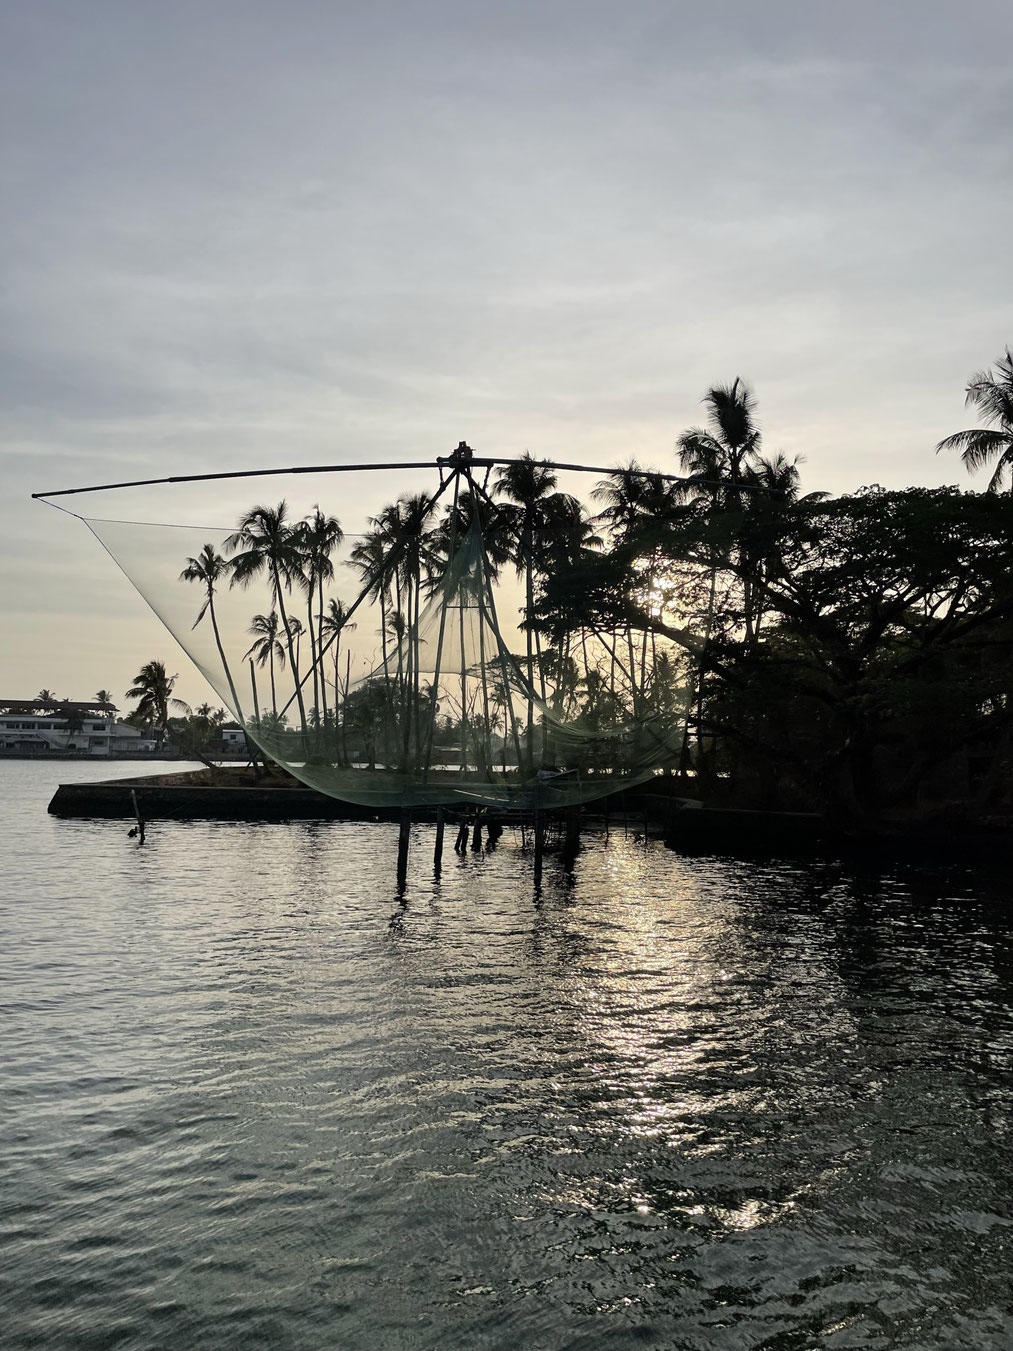 "Cruise through the historic Kochi Harbor which is home to hundreds of Chinese fishing nets"